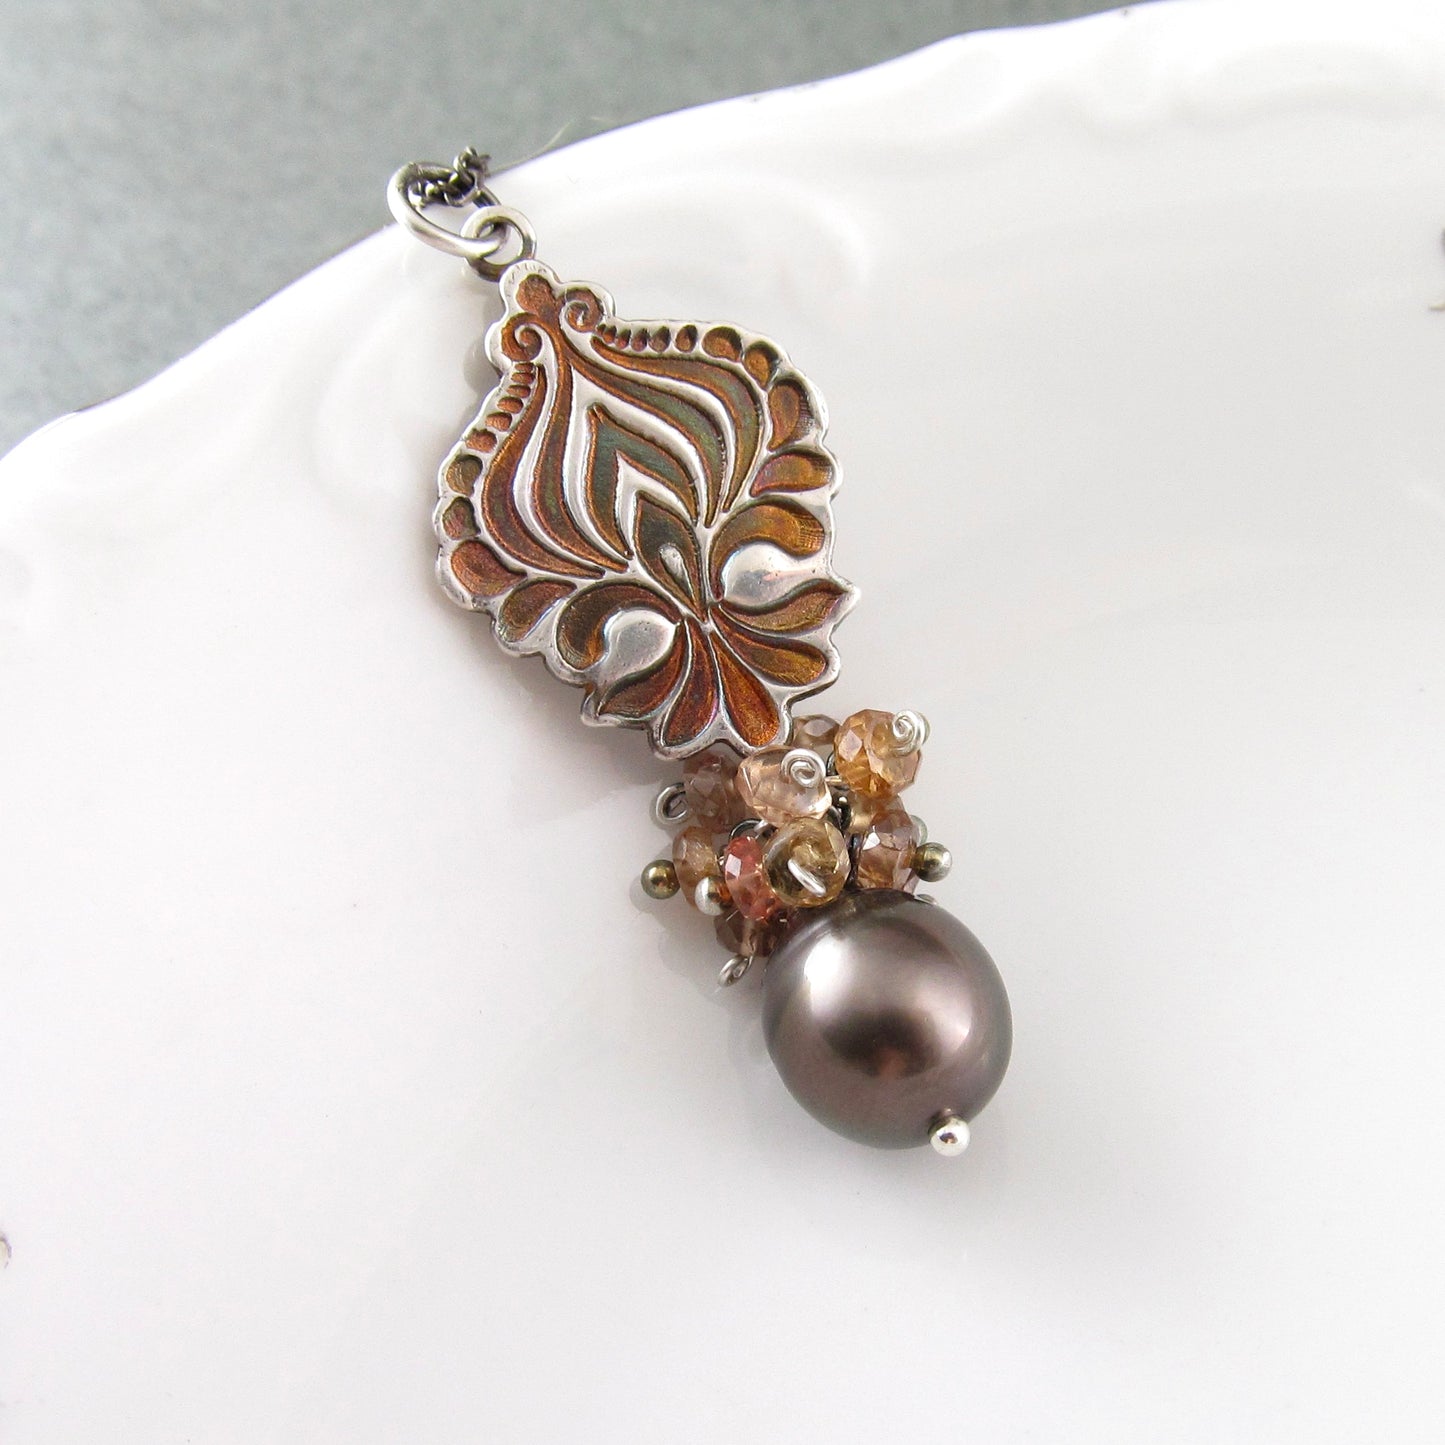 Mocha Tahitian Pearl pendant in fine silver with color change garnets